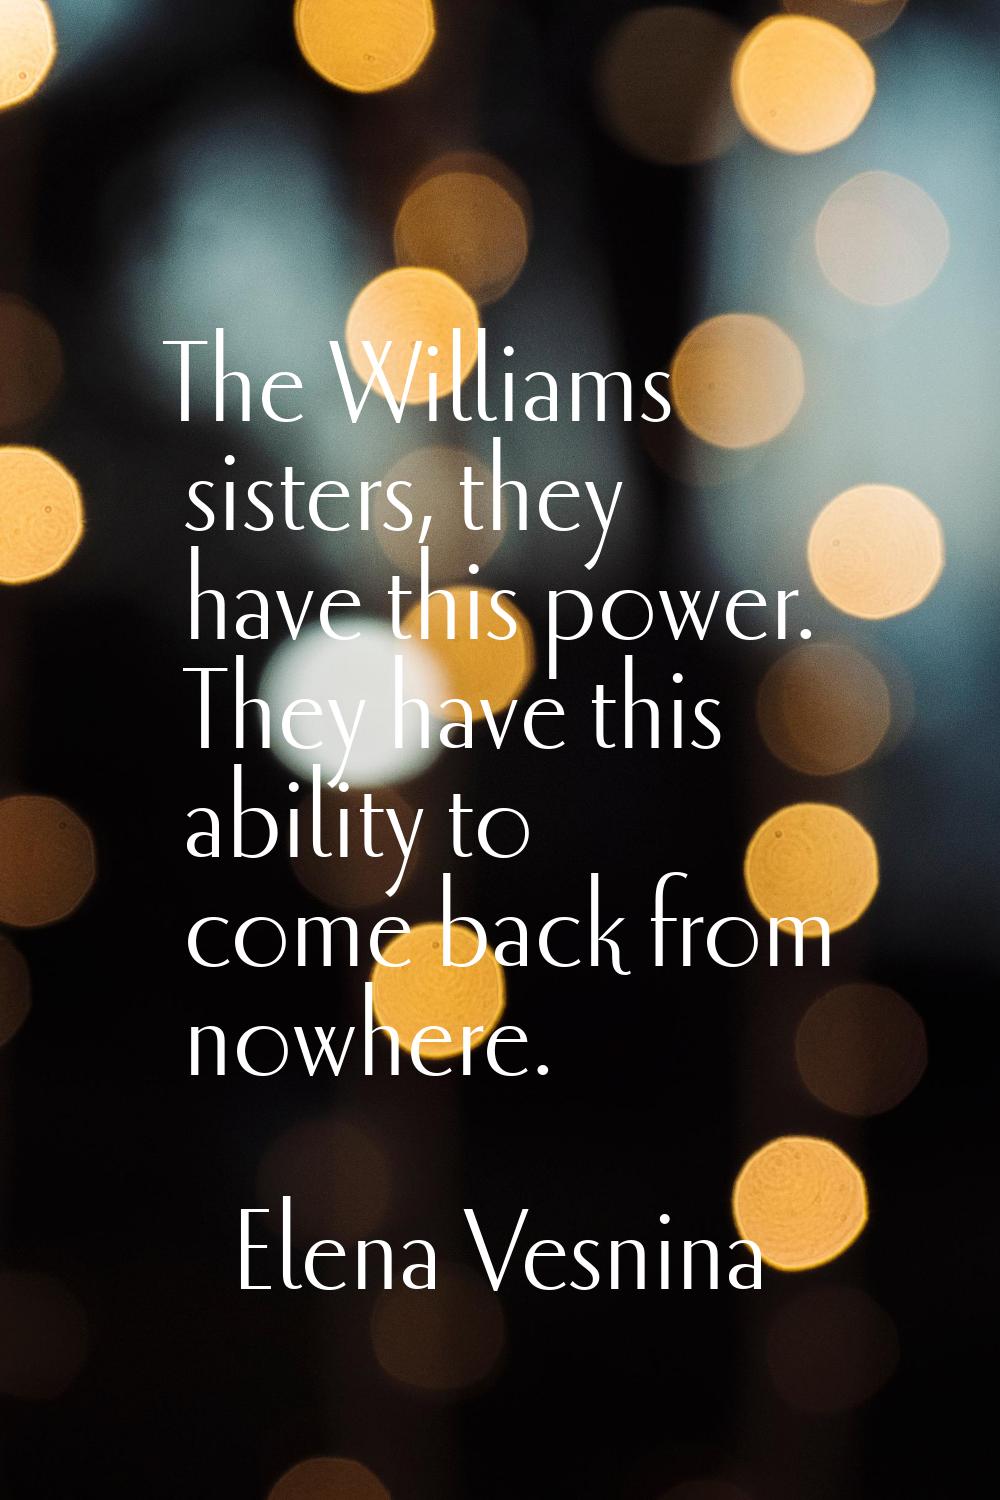 The Williams sisters, they have this power. They have this ability to come back from nowhere.